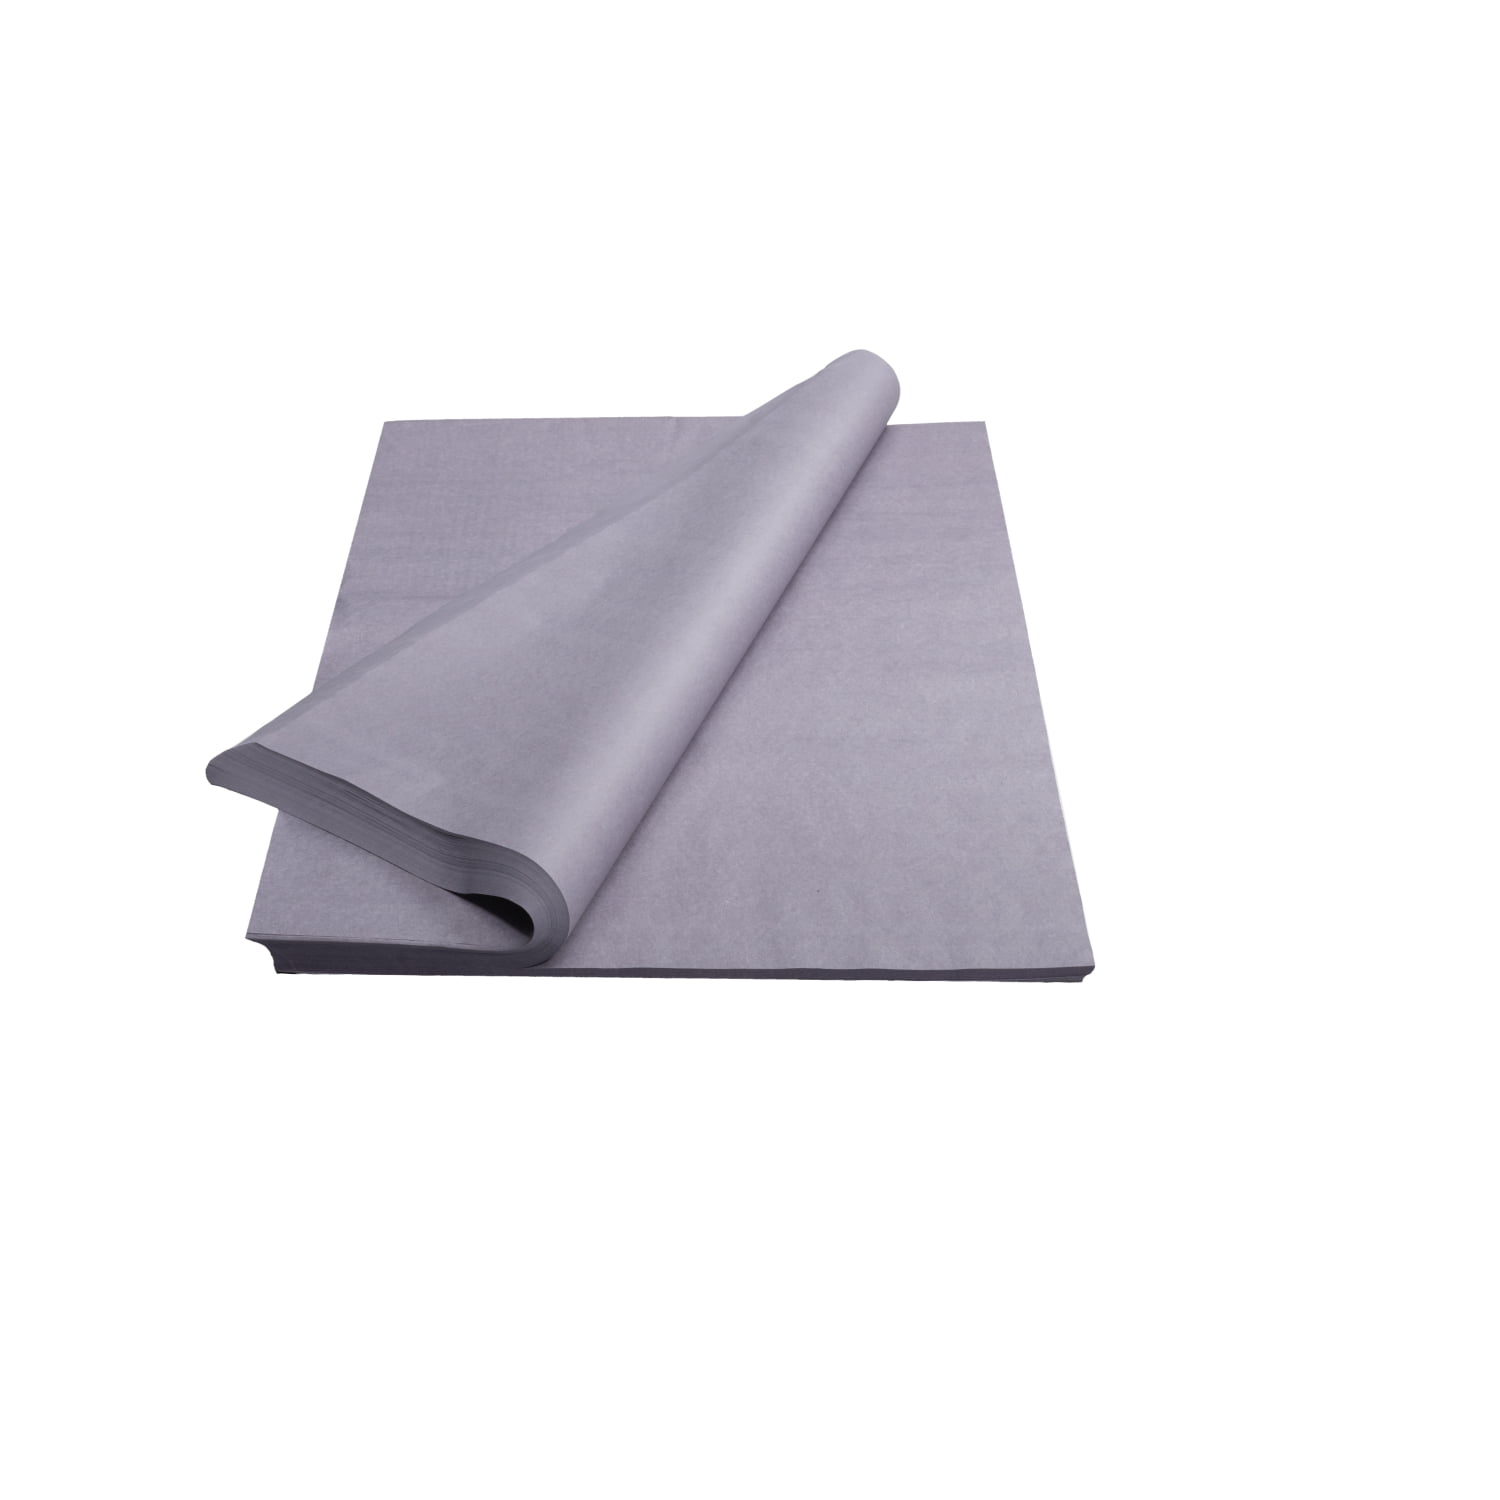 18GSM Sheets SILVER GREY Tissue Wrapping Paper 35 x 45cm 